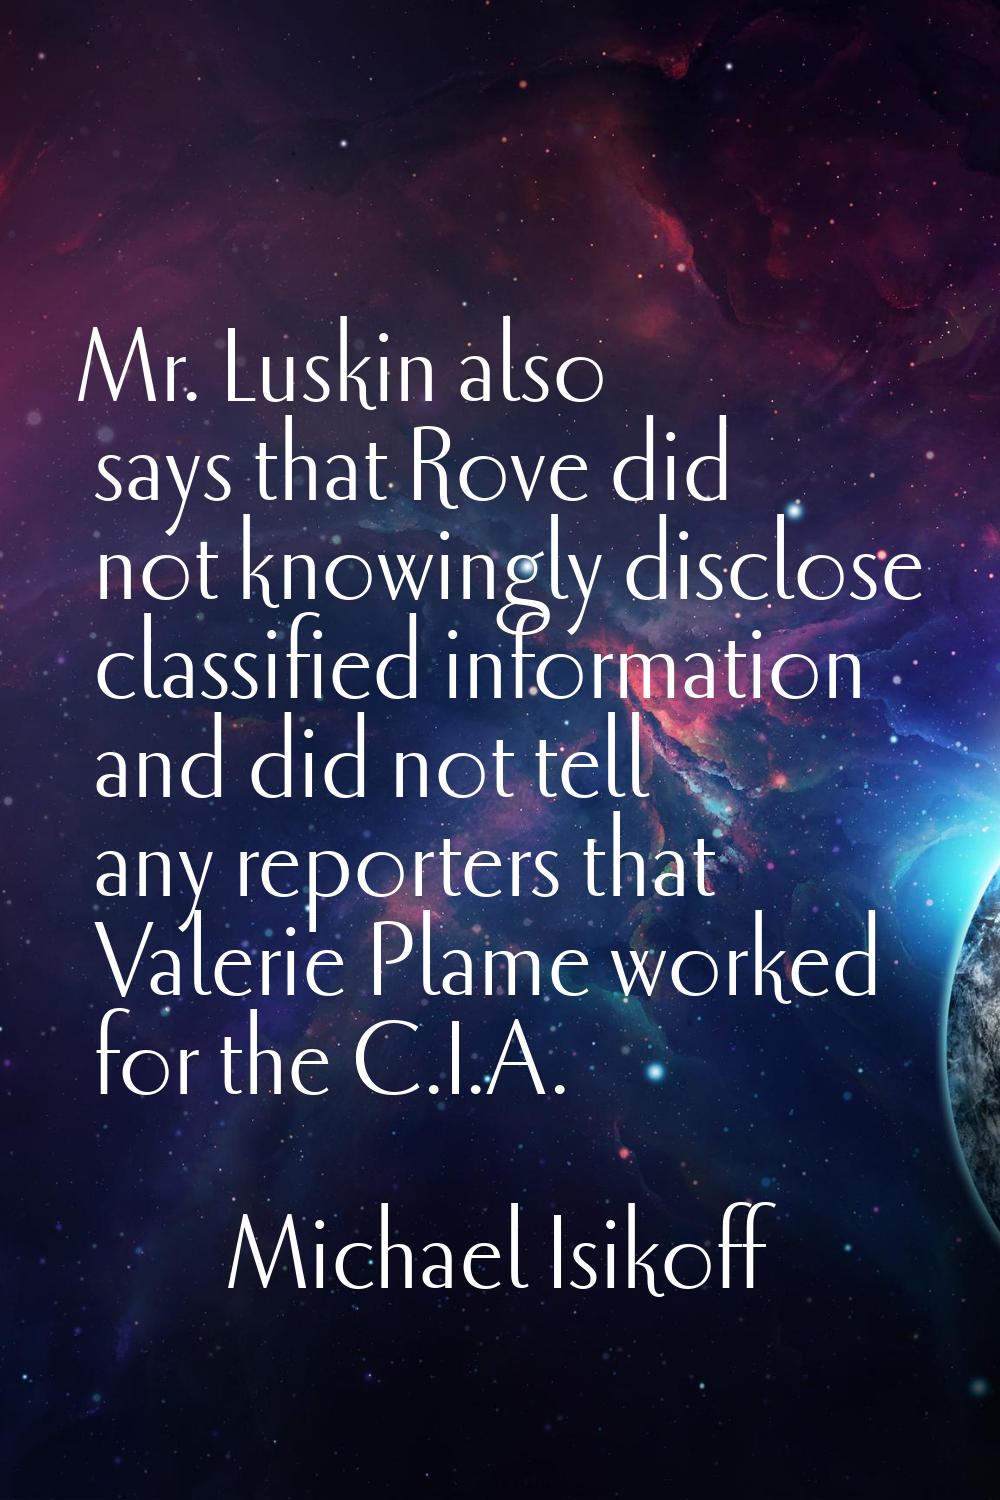 Mr. Luskin also says that Rove did not knowingly disclose classified information and did not tell a